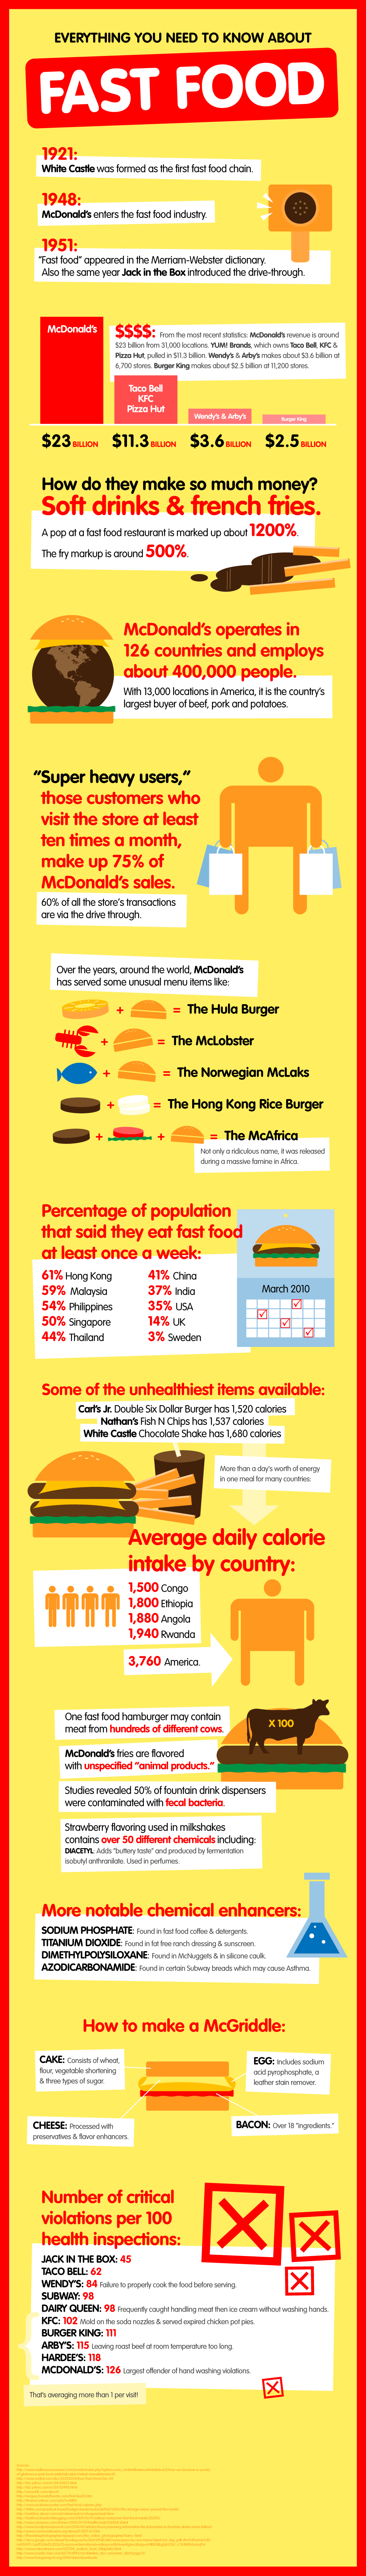 Fast food facts